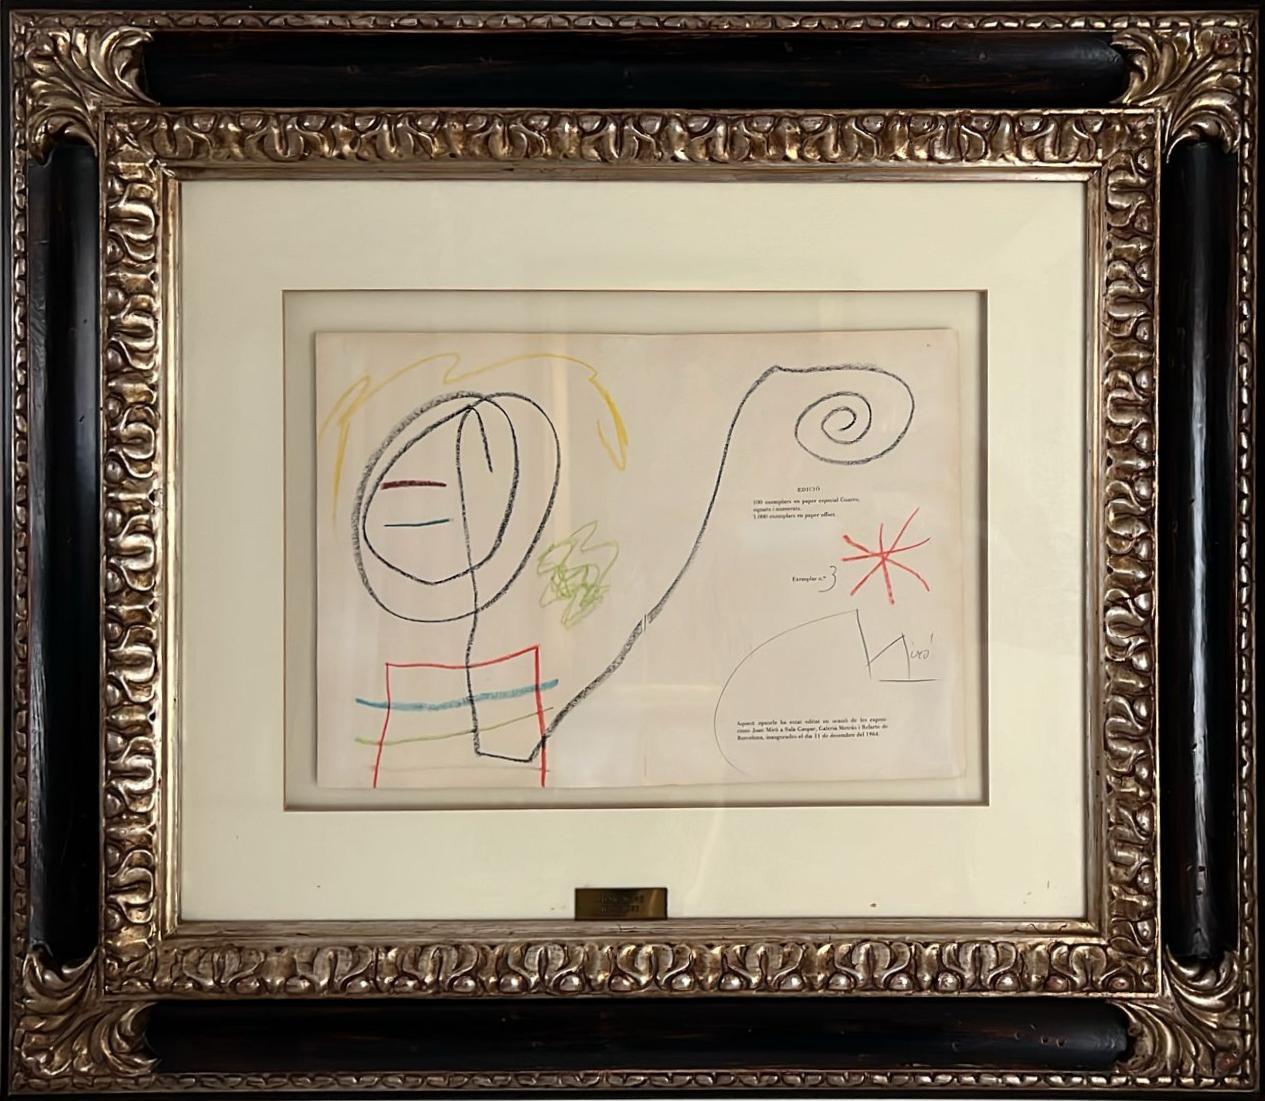 Original drawing painted in wax by Joan Miro.
Certified by Jacques Dupin, official certifier of the artist's work.